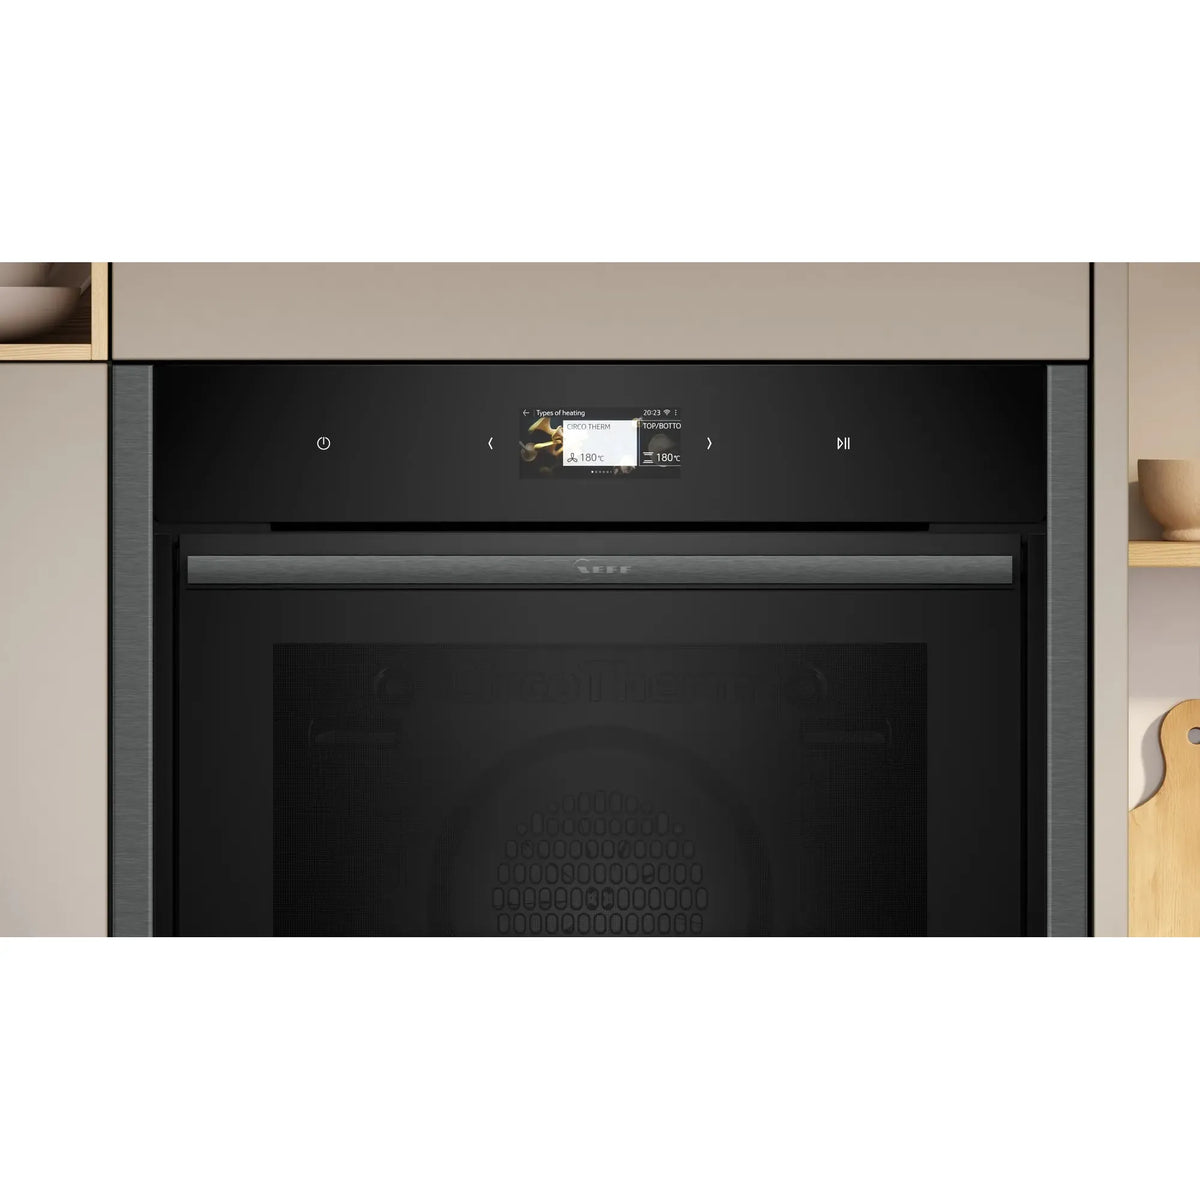 Neff N90 71L Built-In Electric Single Oven - Graphite Grey | B64CS51G0B from Neff - DID Electrical